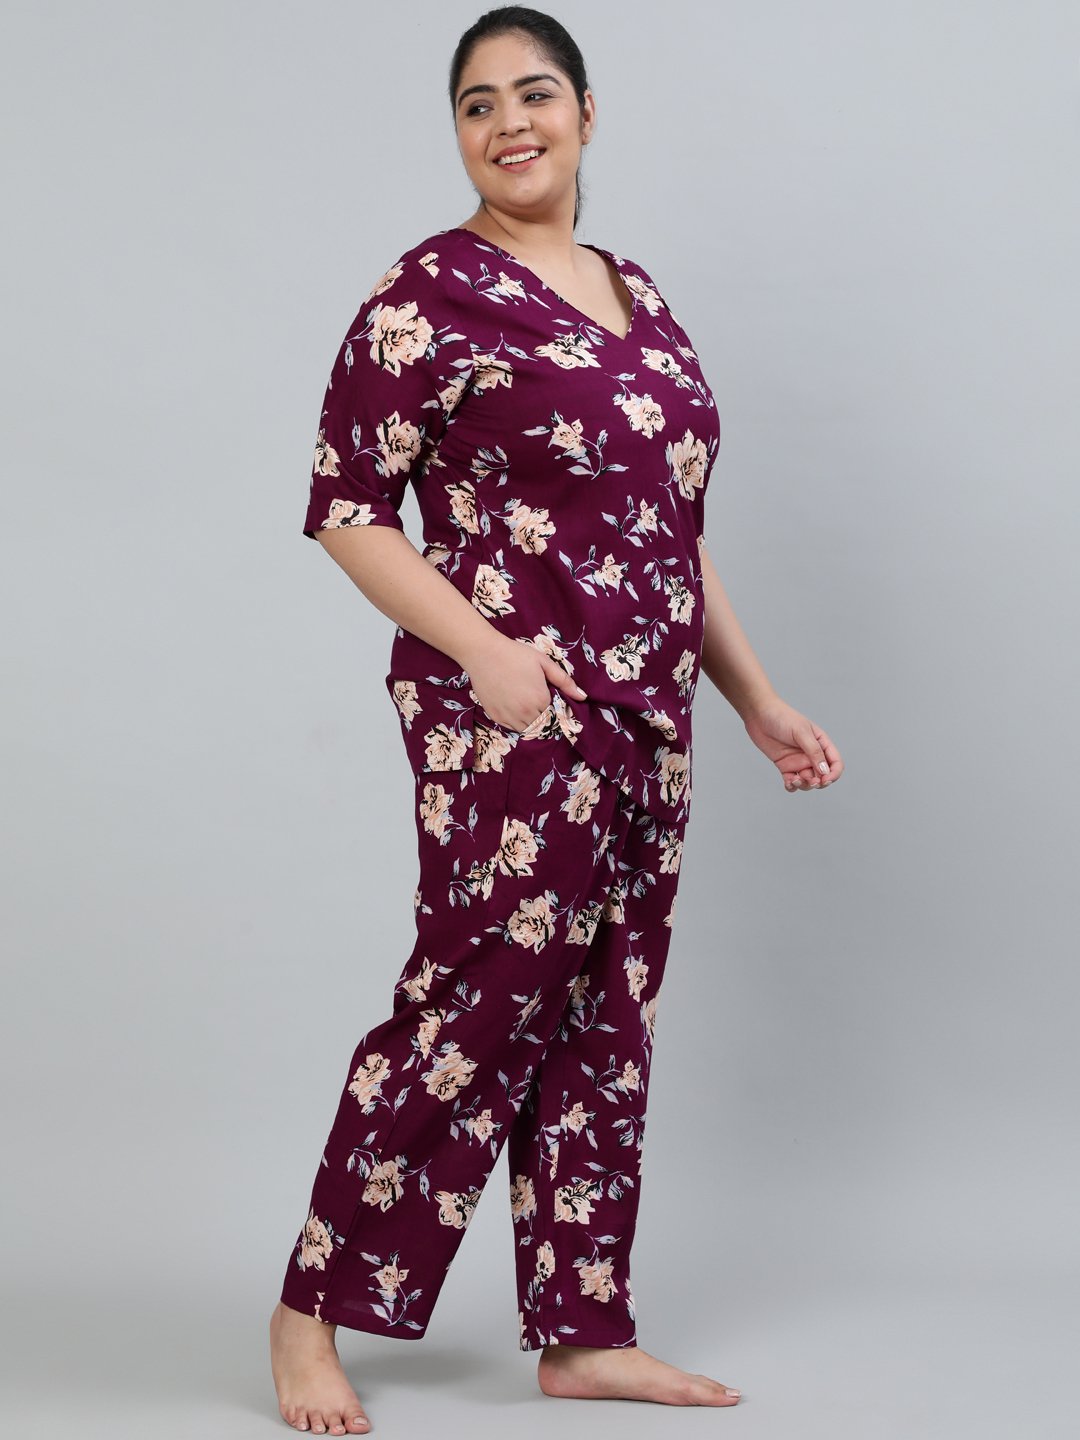 Women's Plus Size Burgundy Floral Printed Night Suit With Half Sleeves - Nayo Clothing